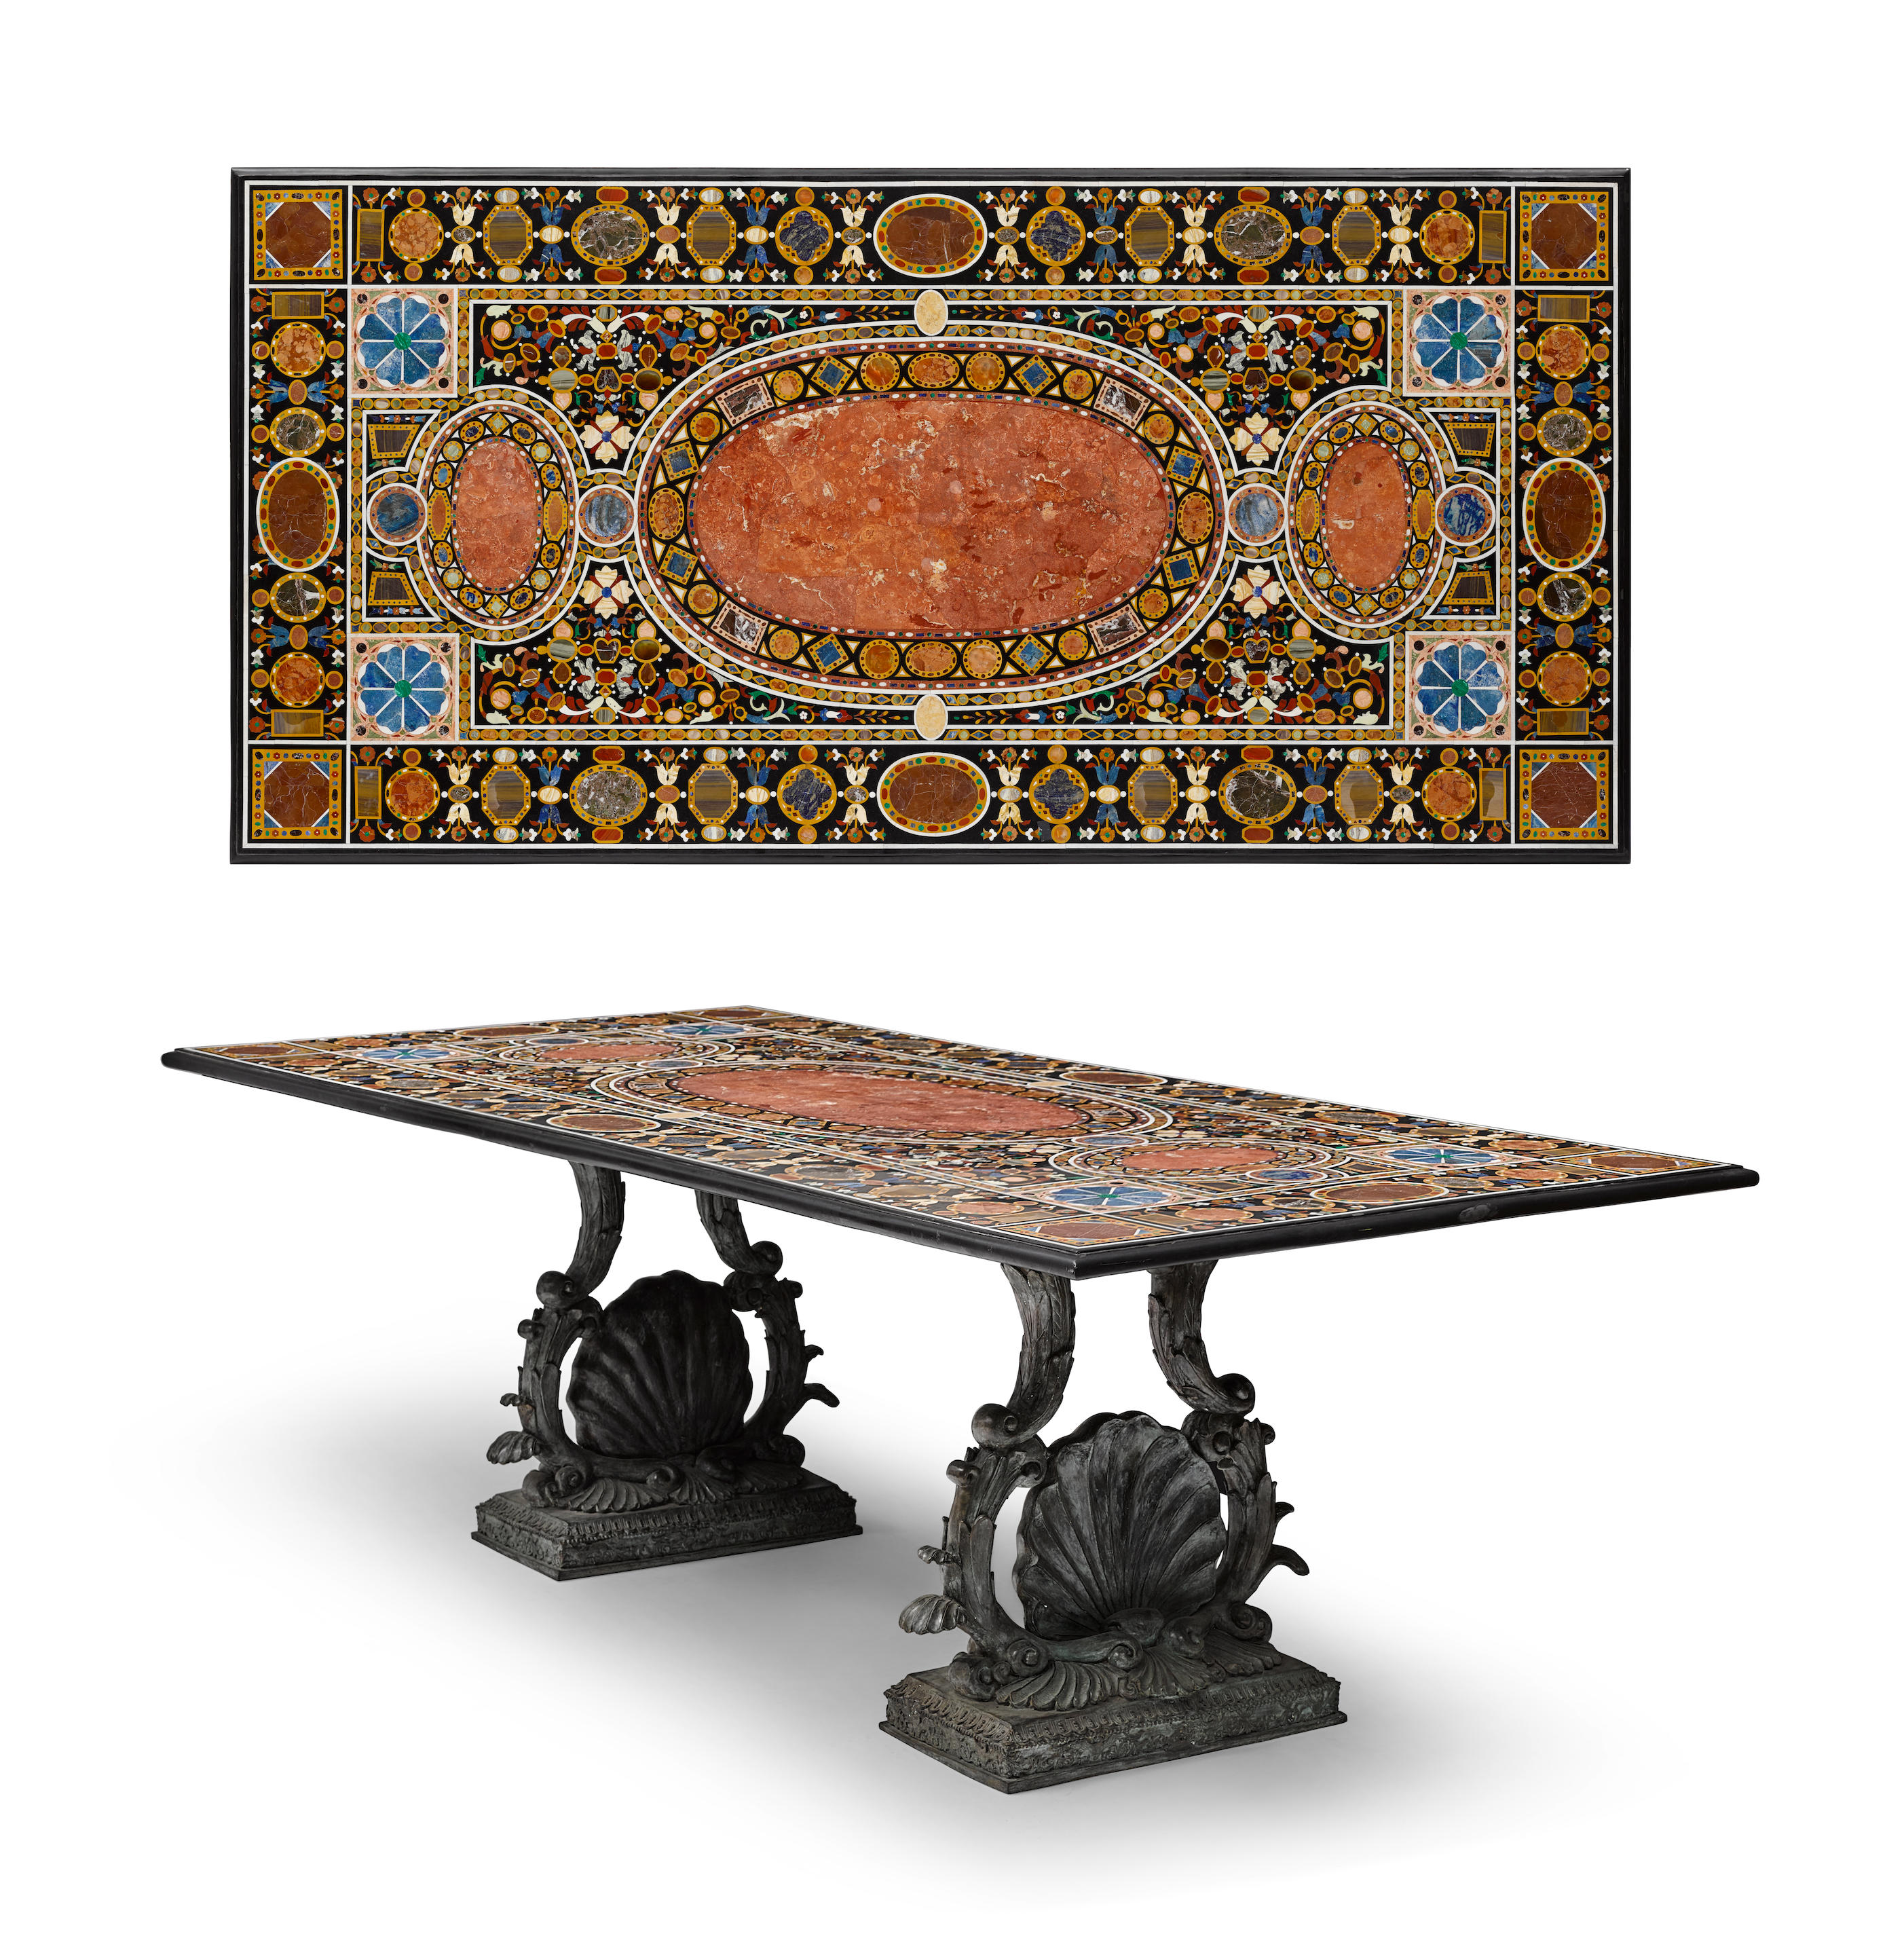 A Semi-Precious Stone Inlaid Dining Table On Bronze Supports